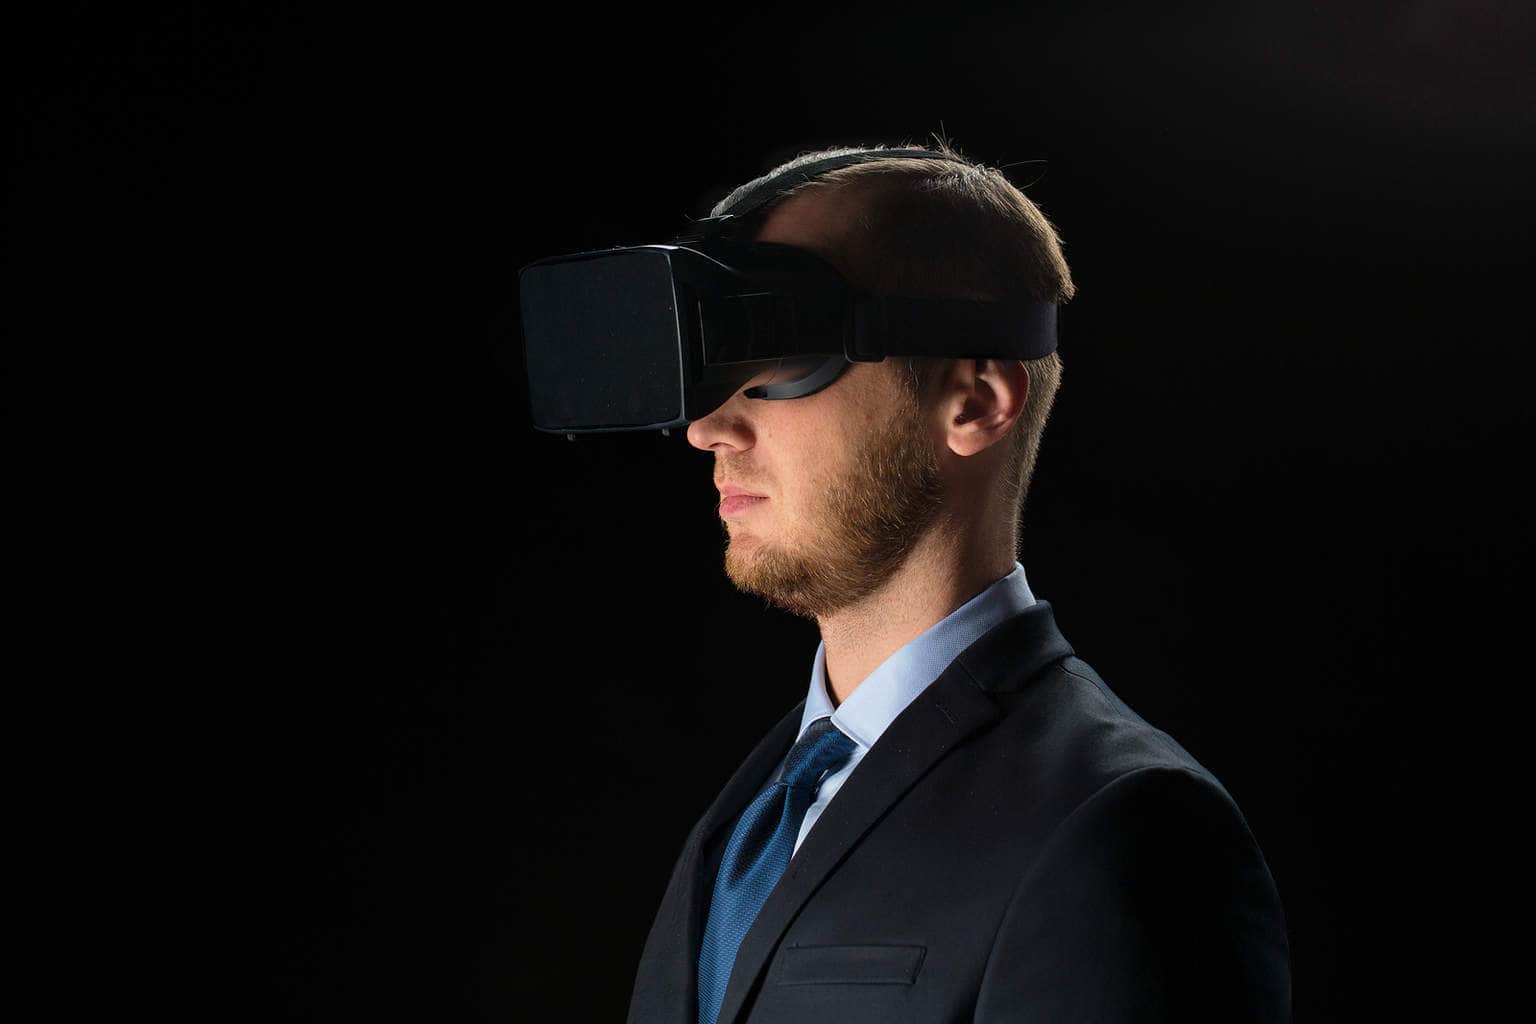 3d technology, virtual reality, cyberspace and augmented reality